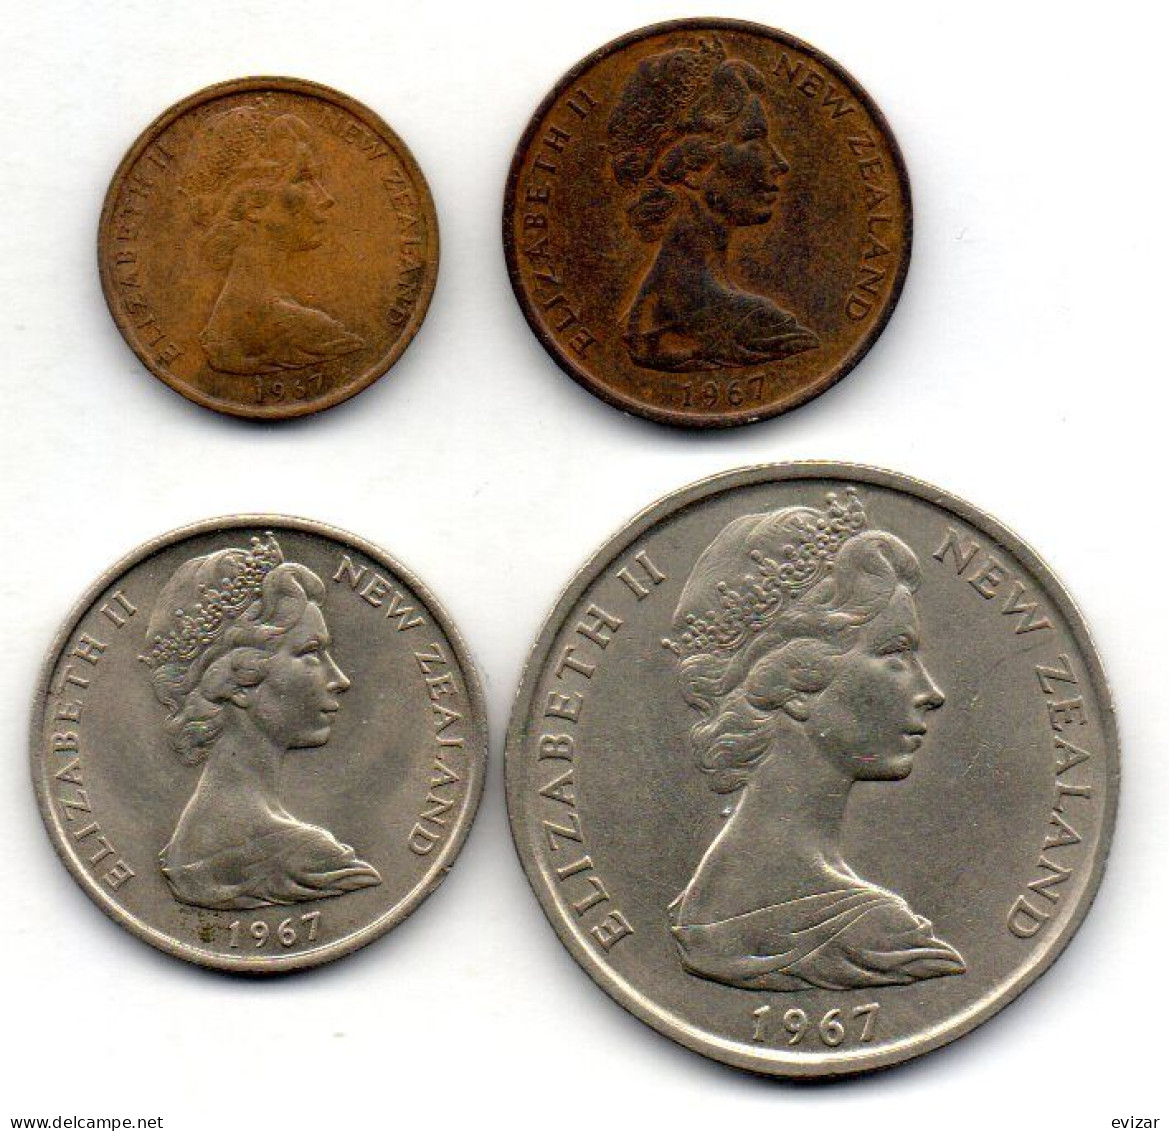 NEW ZEALAND, Set Of Four Coins 1, 2, 10, 50 Cents, Bronze, Copper-Nickel, Year 1967, KM # 31.1, 32.1, 35, 37.1 - Nouvelle-Zélande